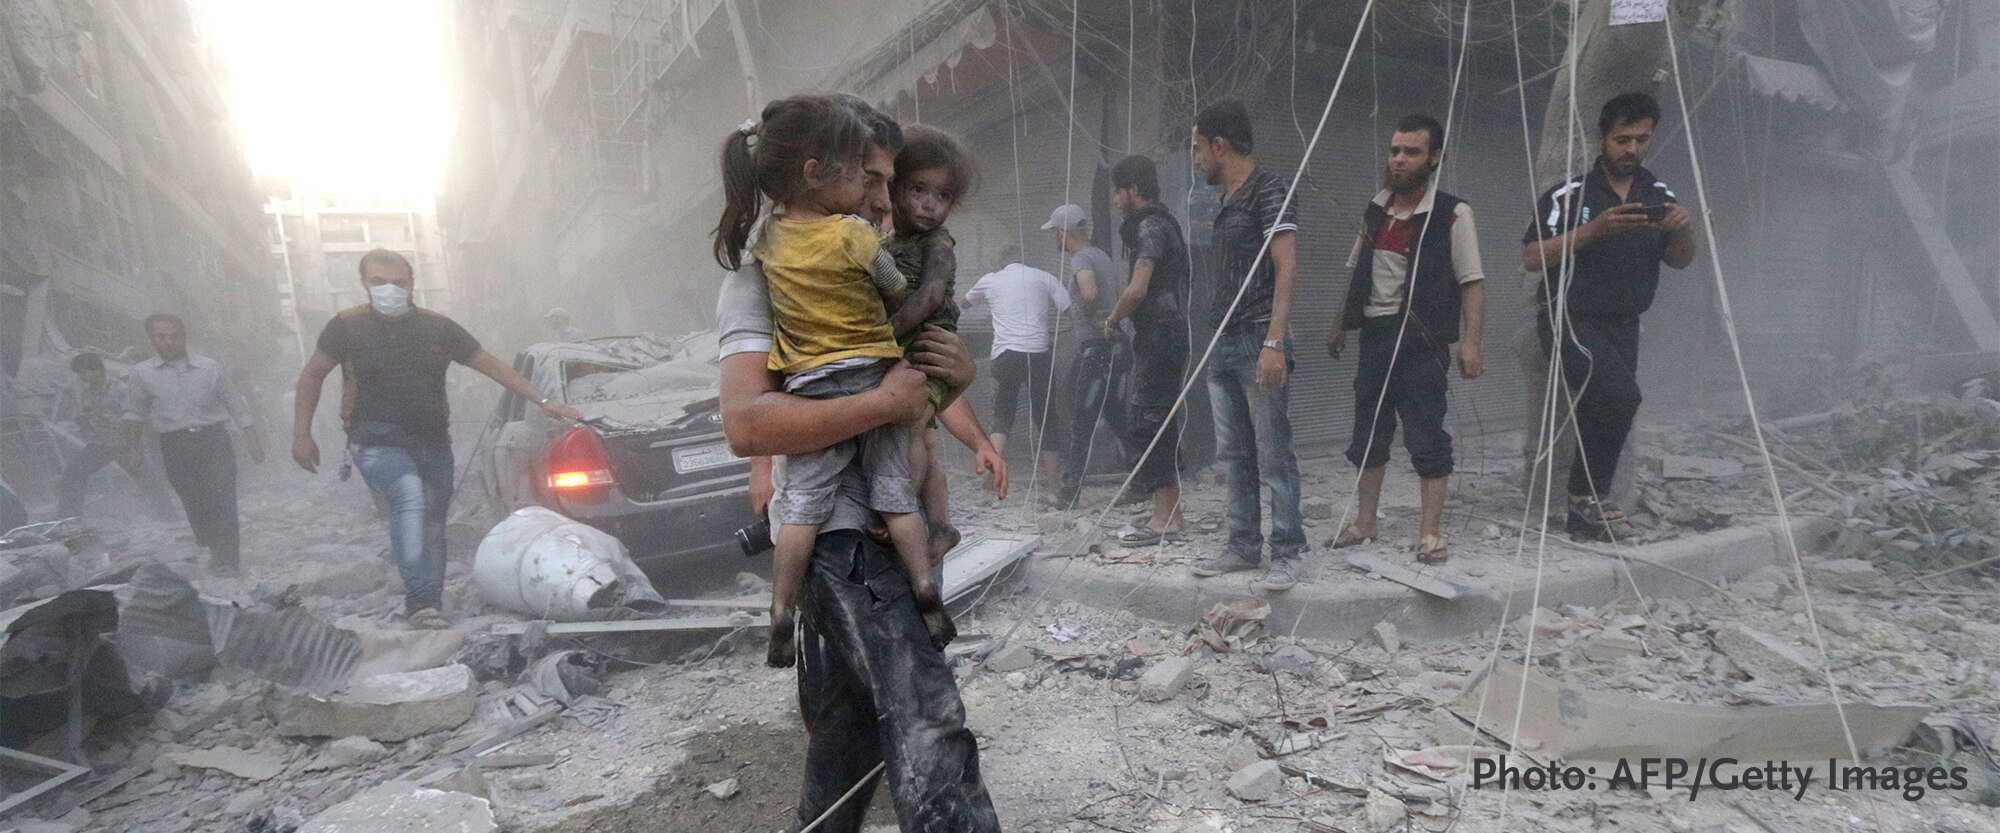 Syrian man carrying child through building rubble in Syria